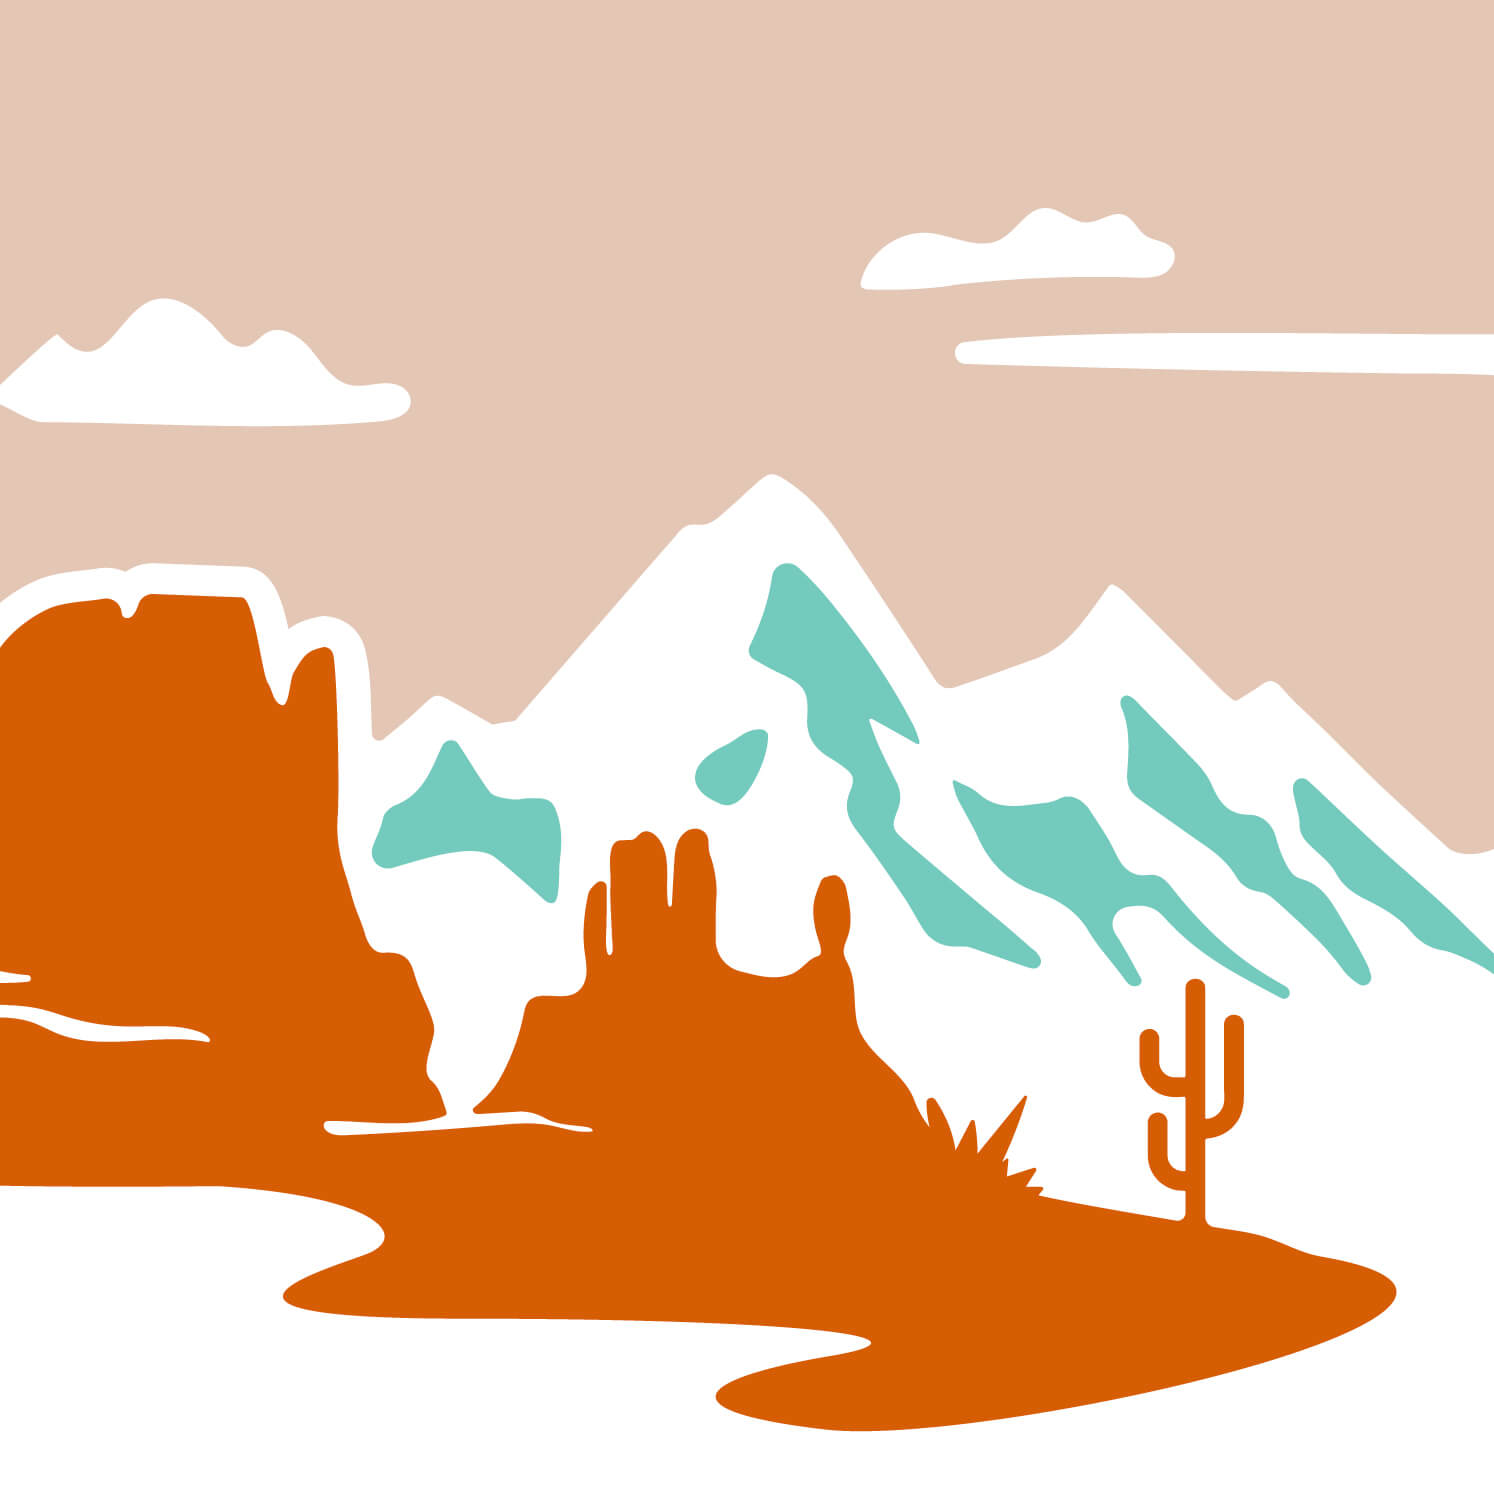 Ilana Fay Copy, copywriter for outdoors brand, graphic logo design illustrated scene of mountains and deserts